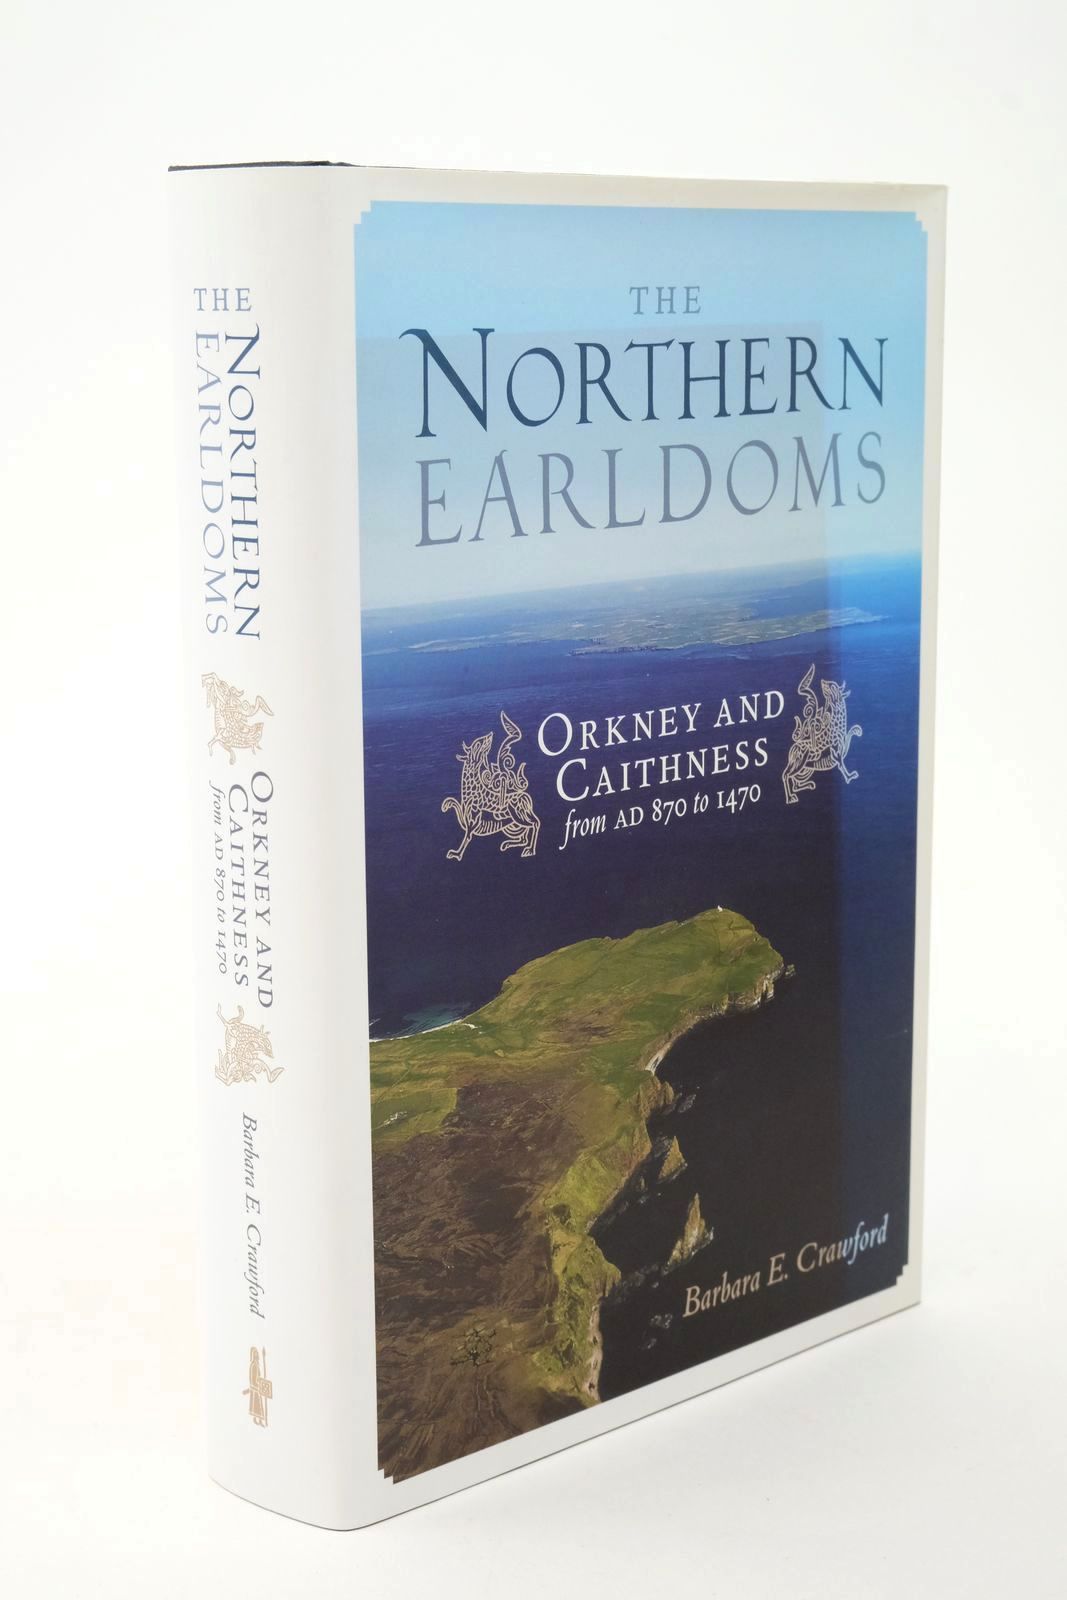 Photo of THE NORTHERN EARLDOMS - ORKNEY AND CAITHNESS FROM AD 870 TO 1470- Stock Number: 1322597